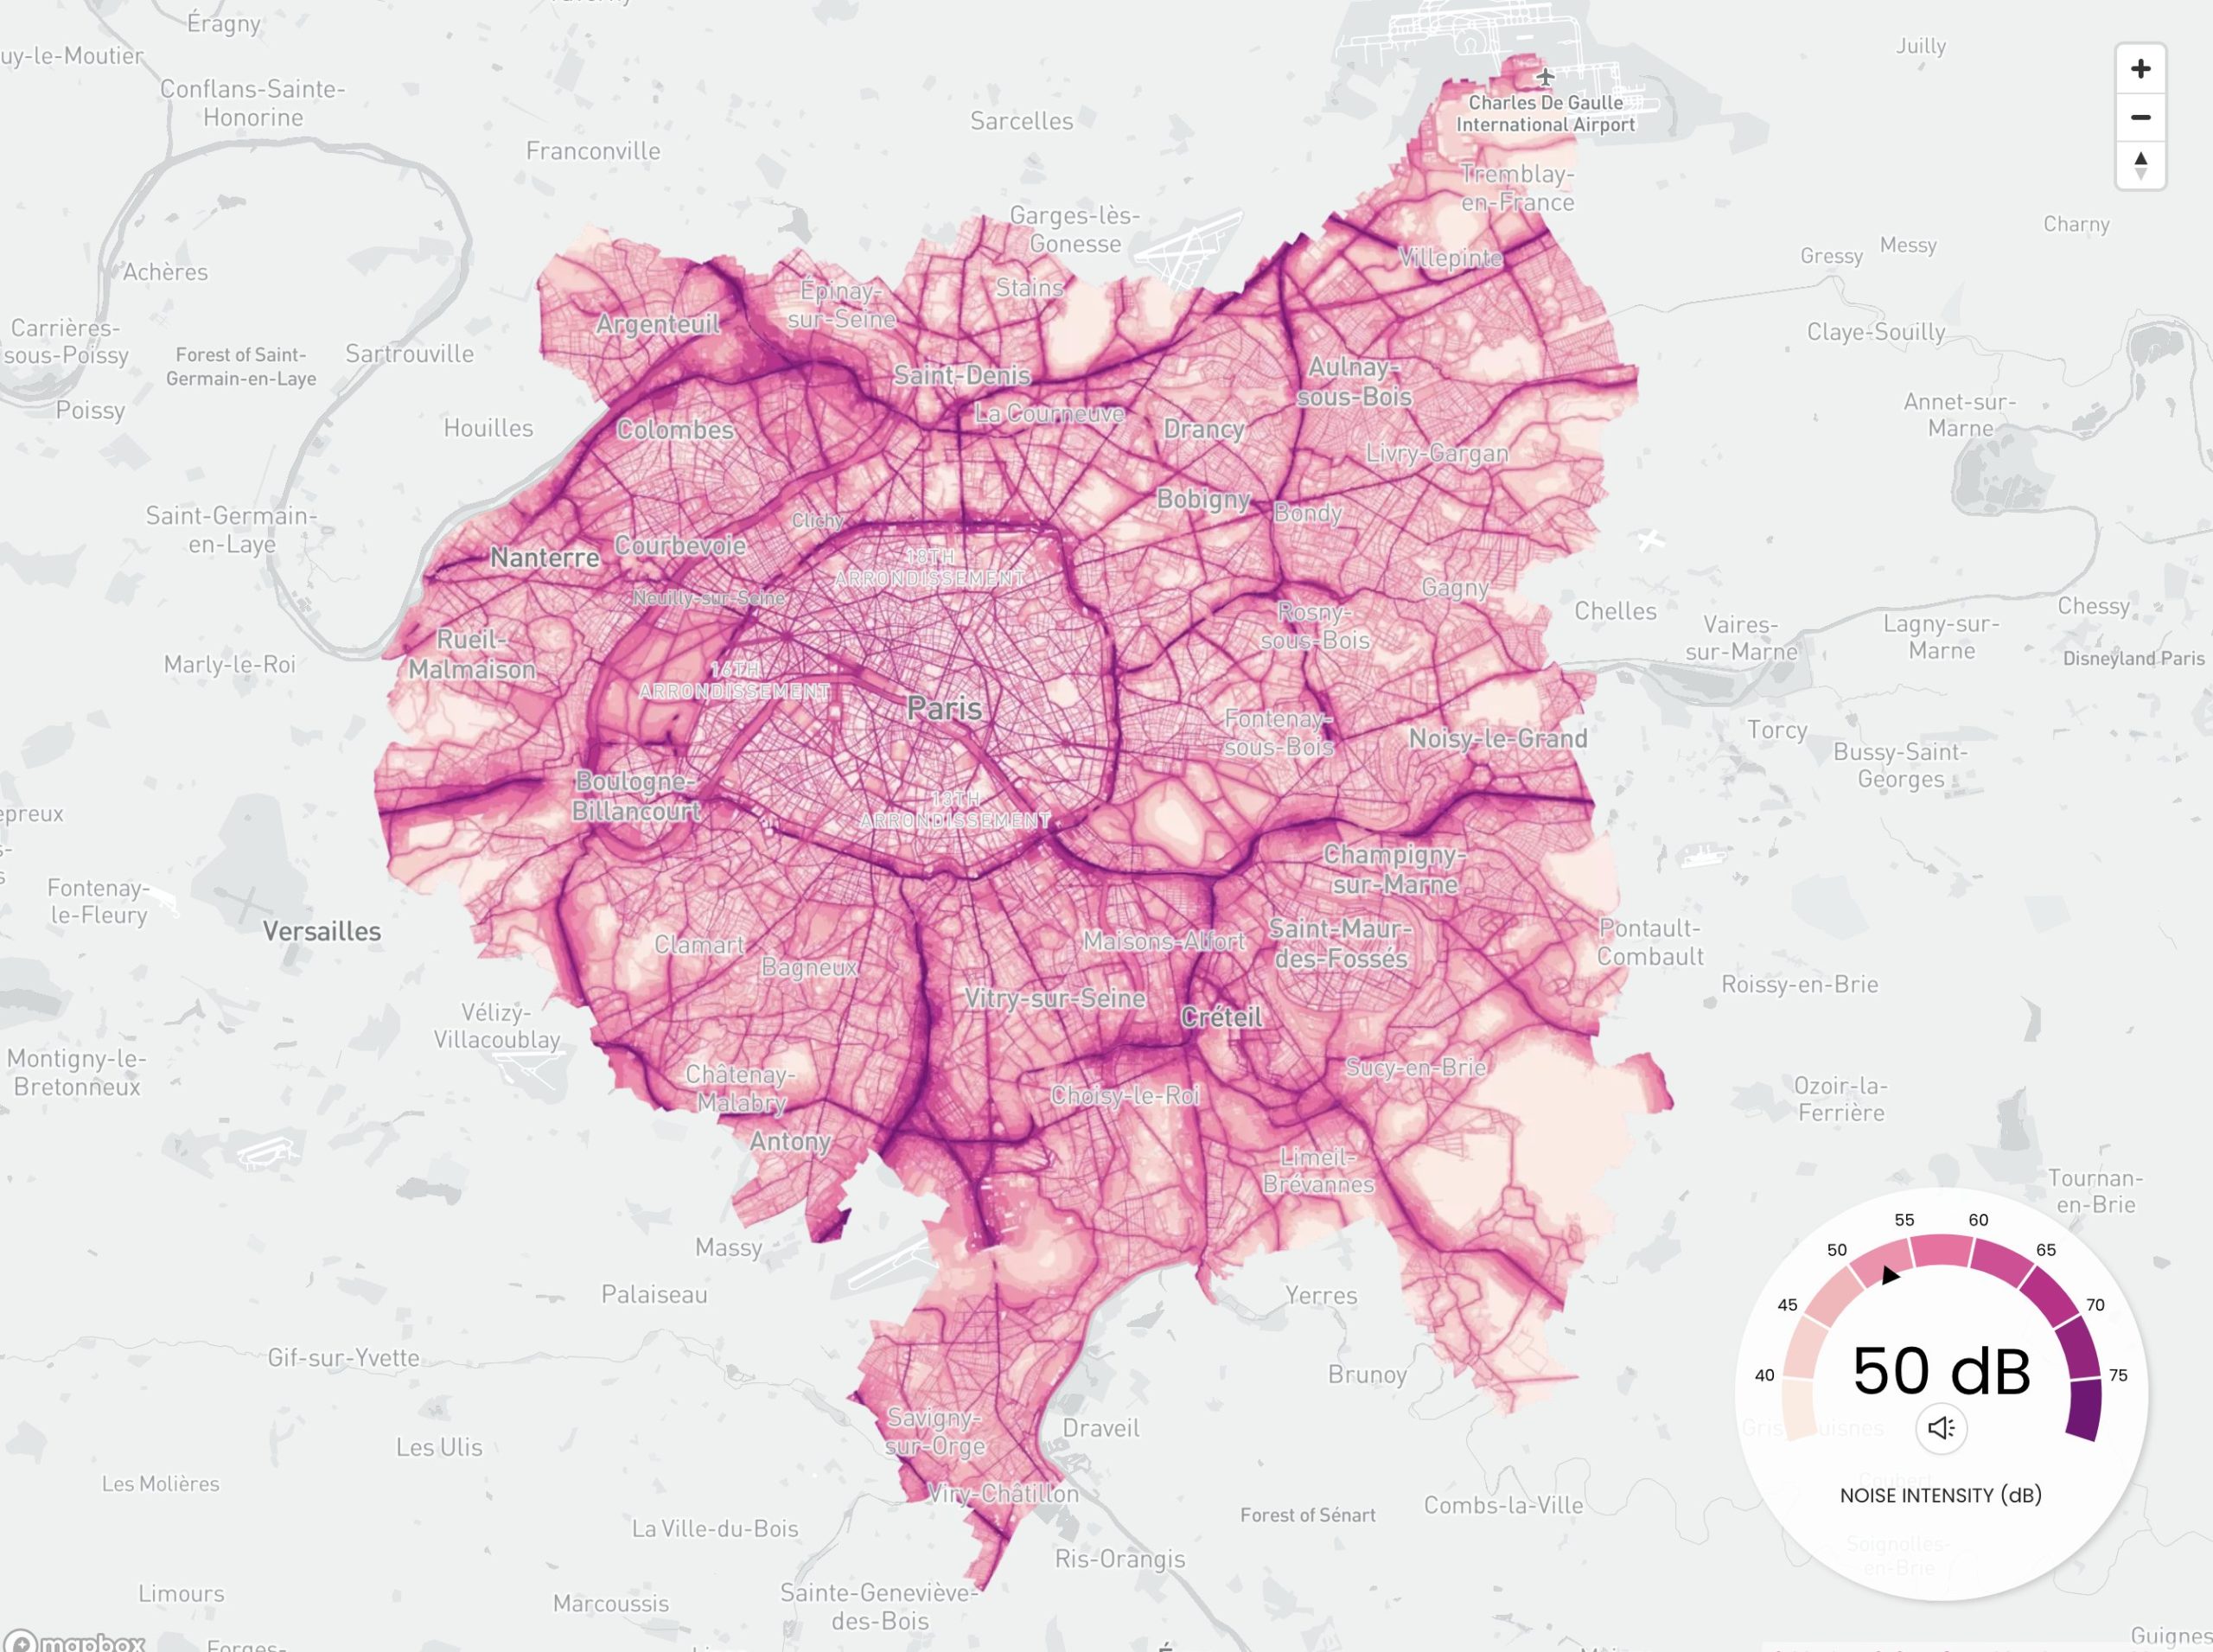 map of Paris showing noise levels in shades of pink with a decibel meter in the bottom right